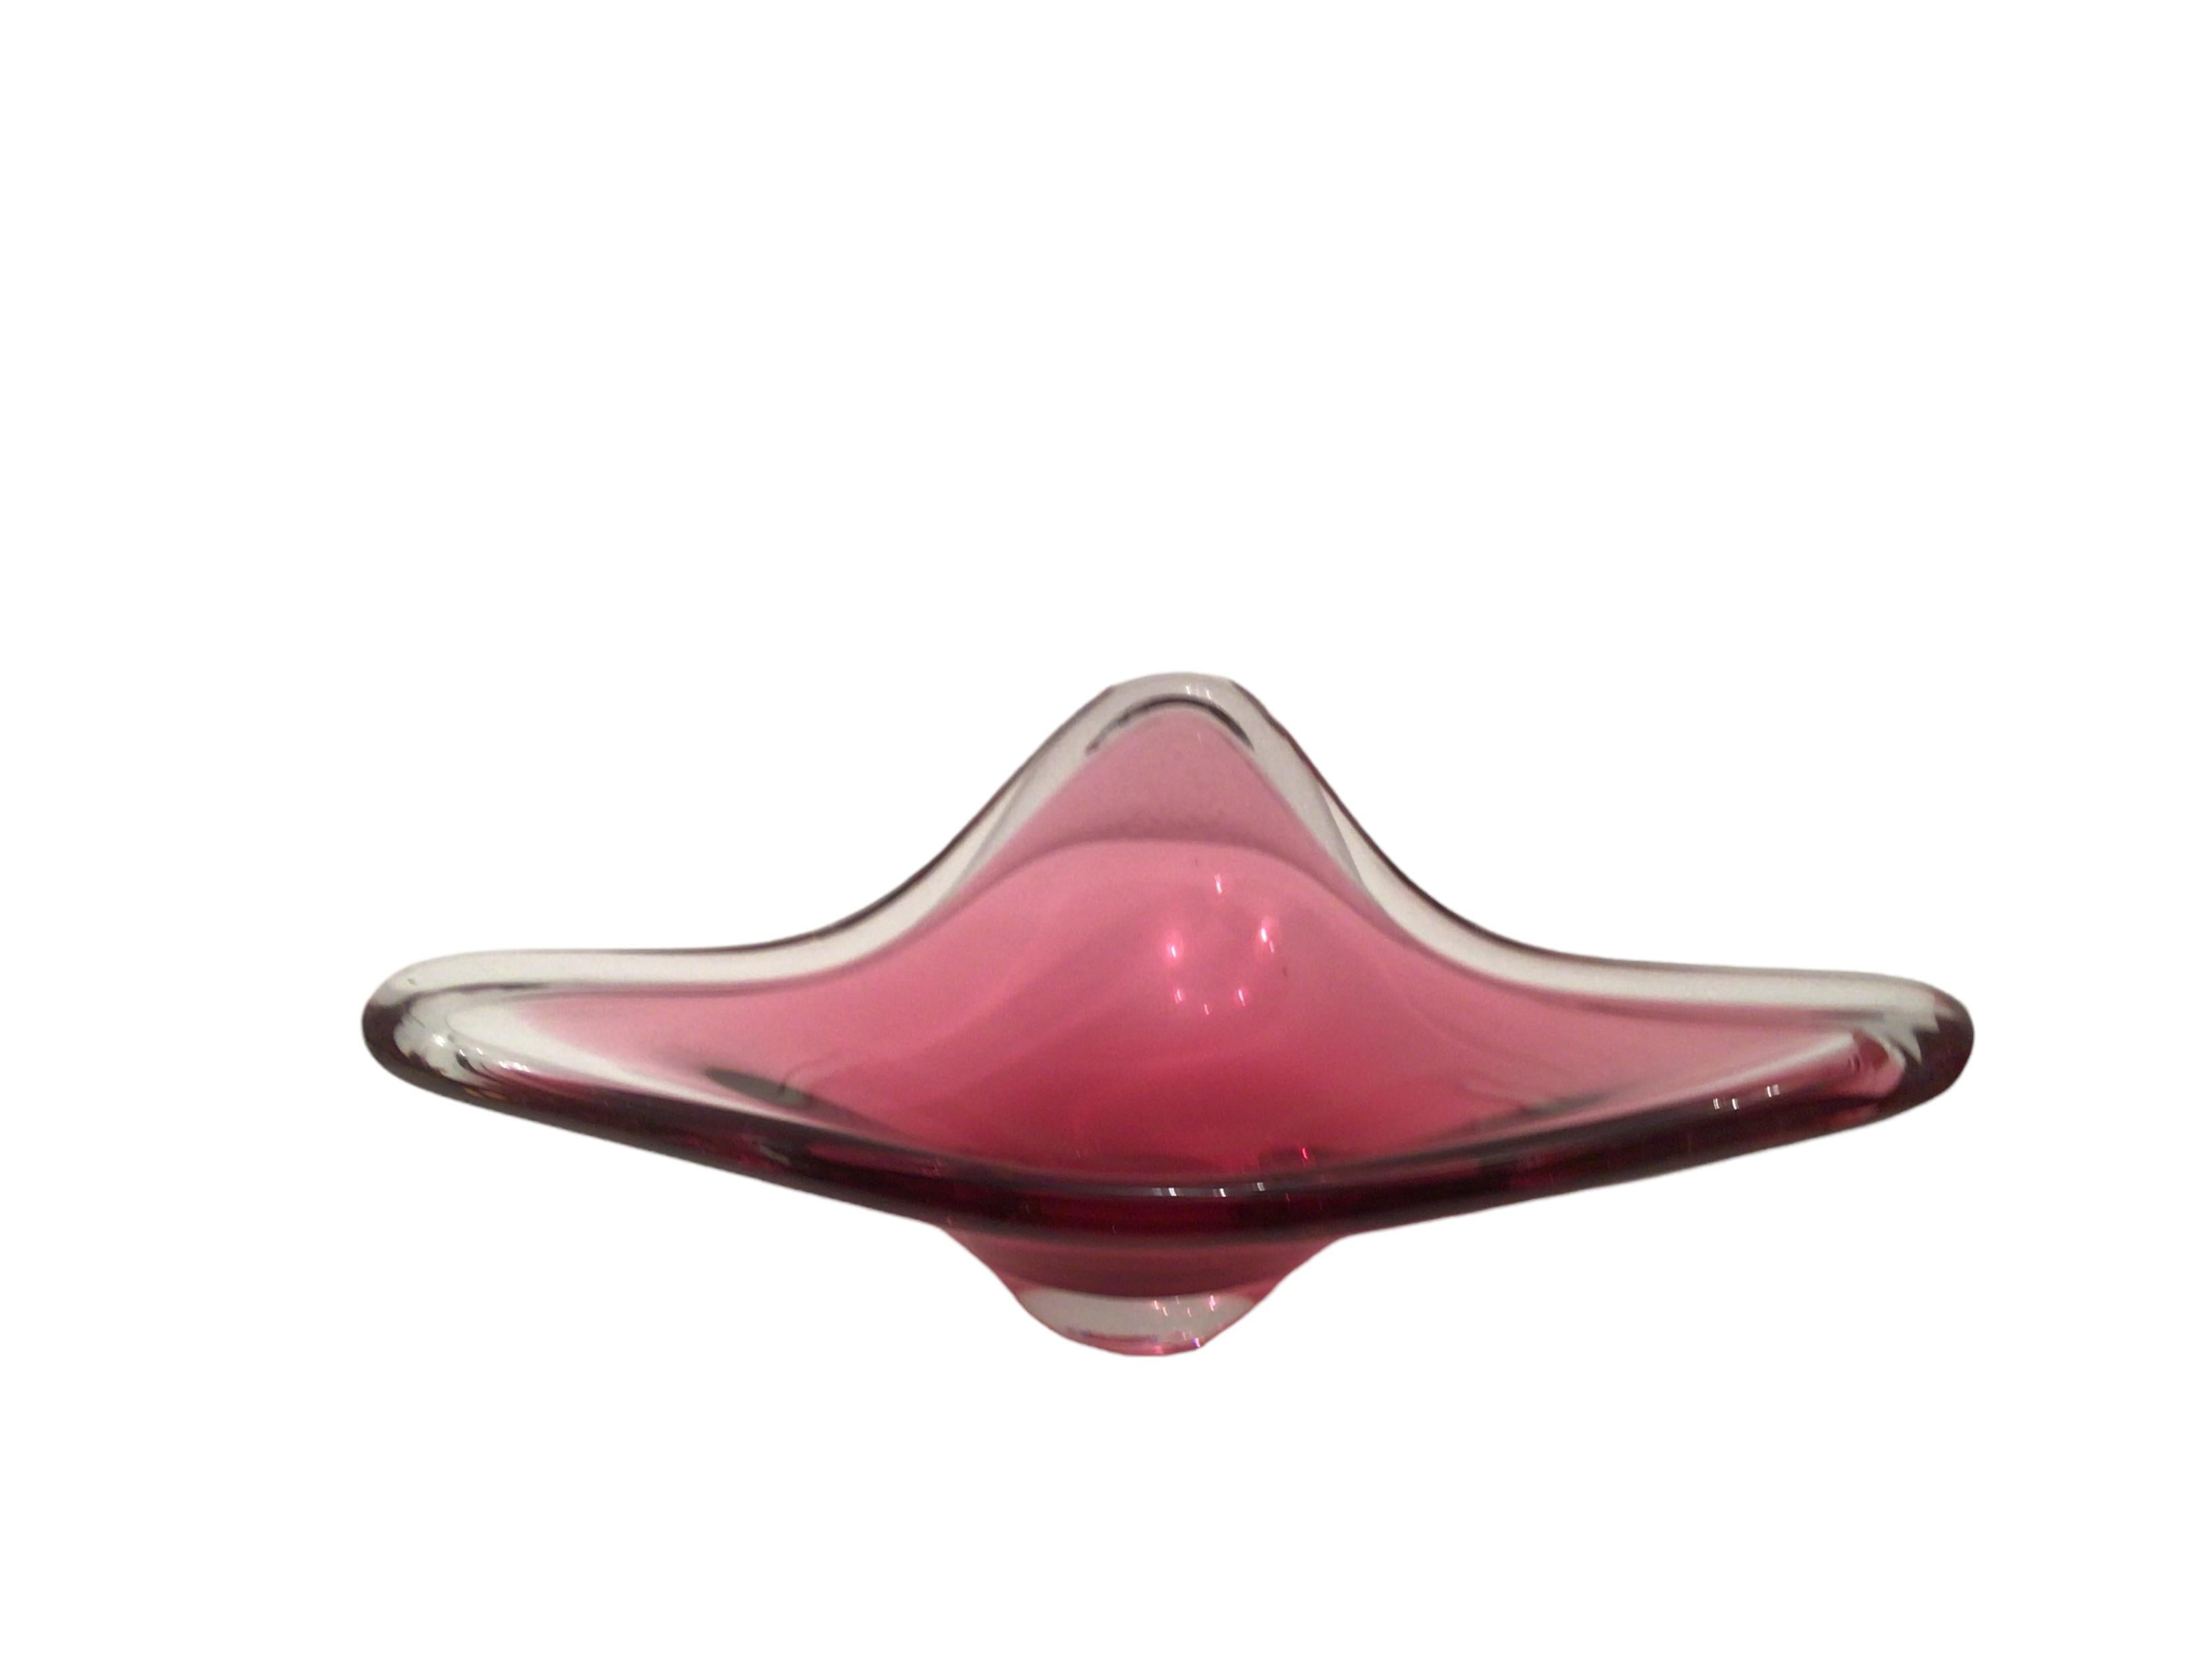 Gorgeous hand blown Murano art glass piece with Sommerso and bullicante techniques. A beautiful organic shaped bowl, catchall or centrepiece, Venice, Murano, Italy, 1980s. Colors are a pink and clear. A nice addition to any room.